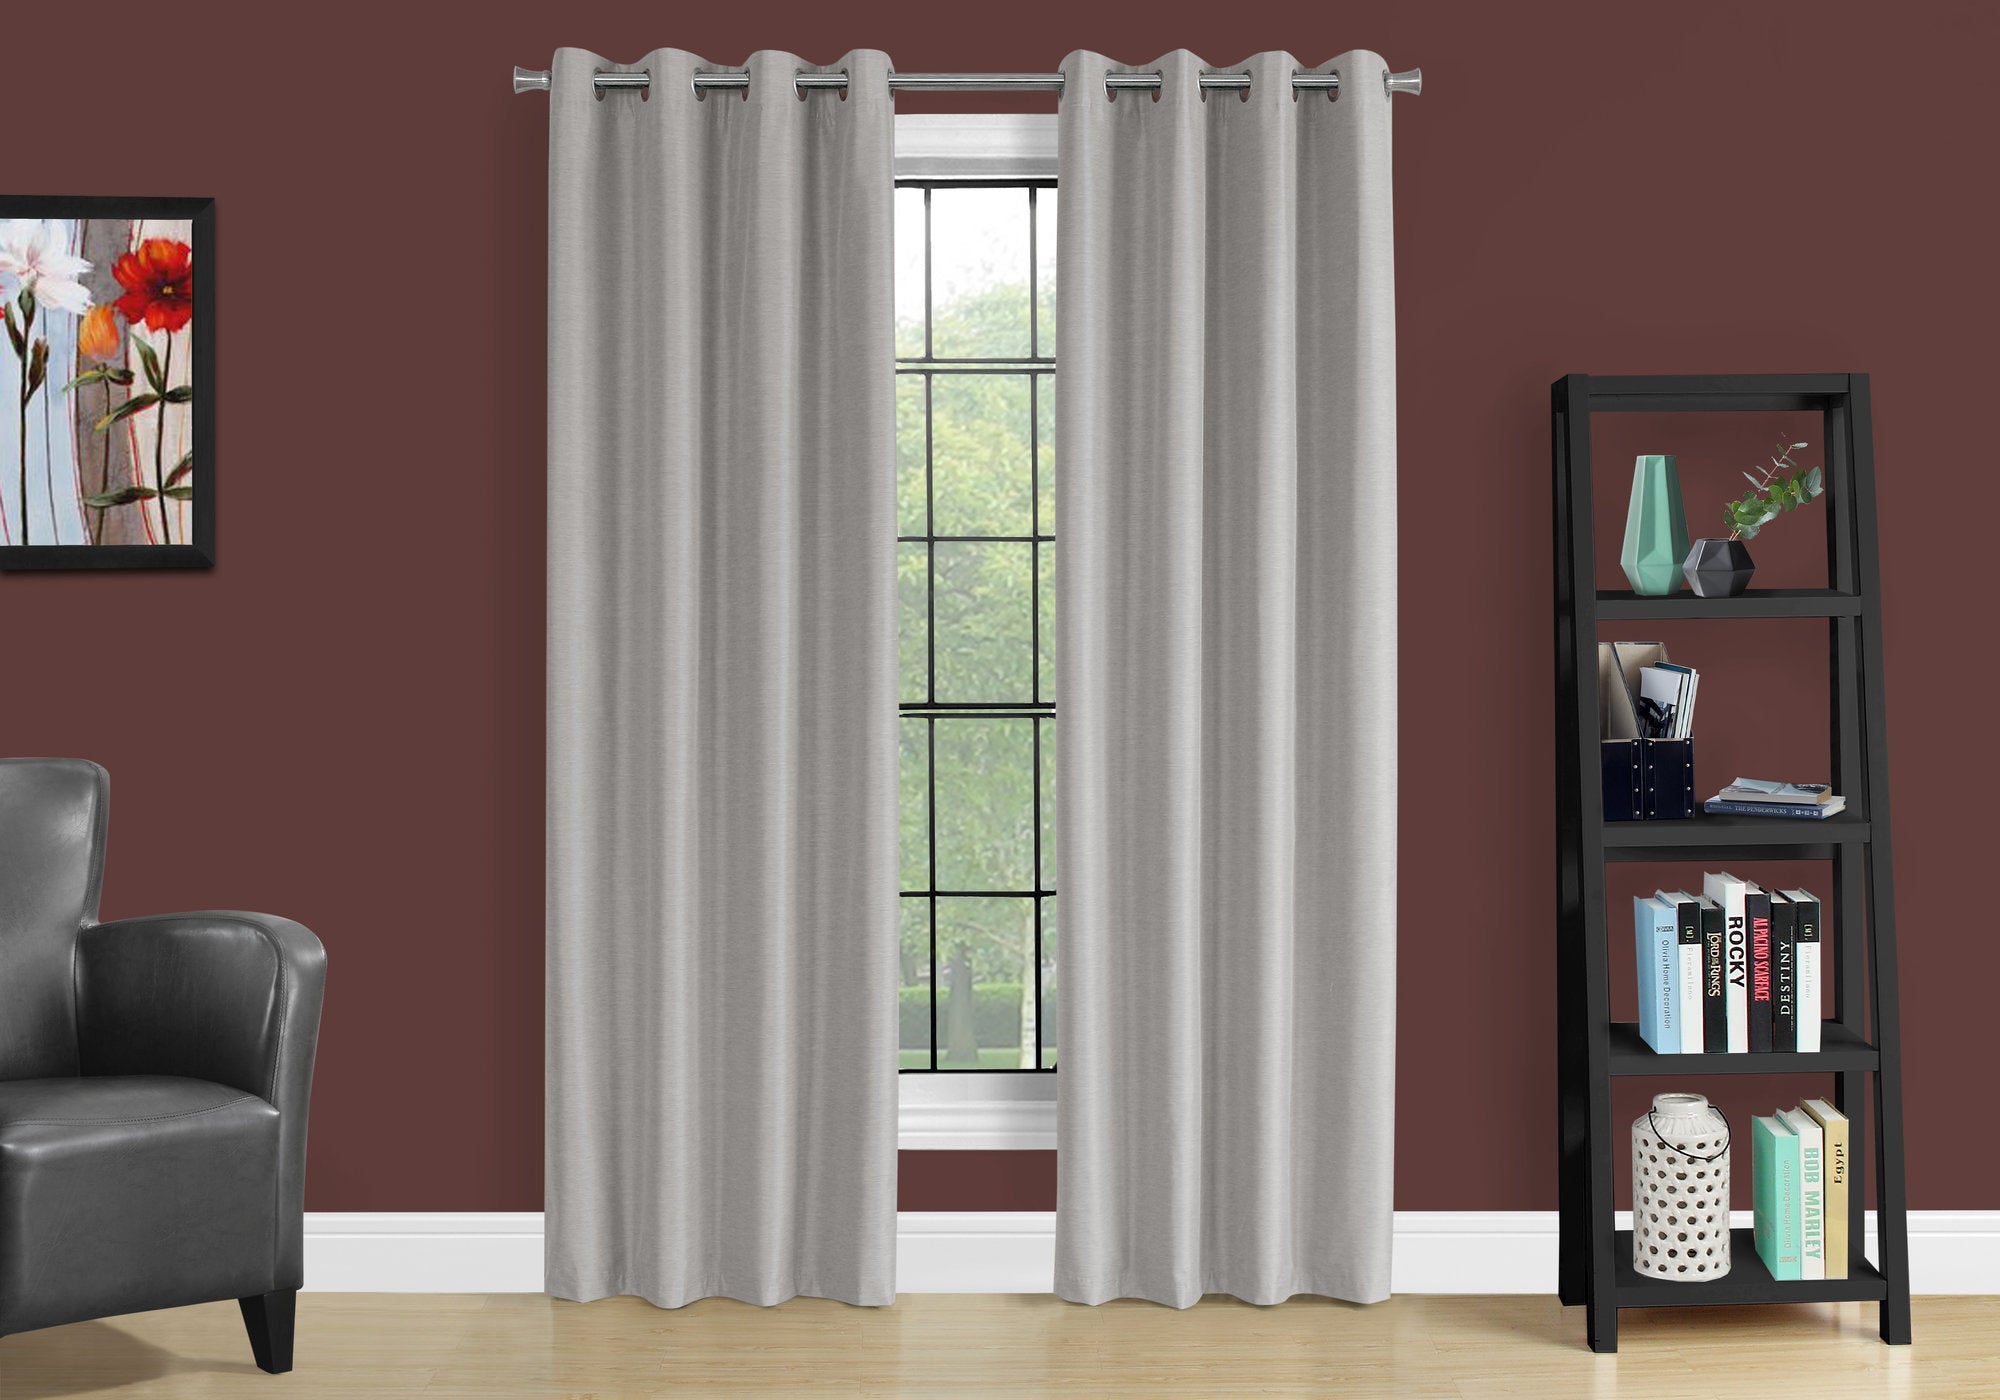 MN-979835    Curtain Panel, 2Pcs Set, 54"W X 84"L, 100% Blackout, Grommet, Living Room, Bedroom, Kitchen, Thermal Insulation Fabric, Polyester Full Light Blocking Fabric, Silver, Contemporary, Modern